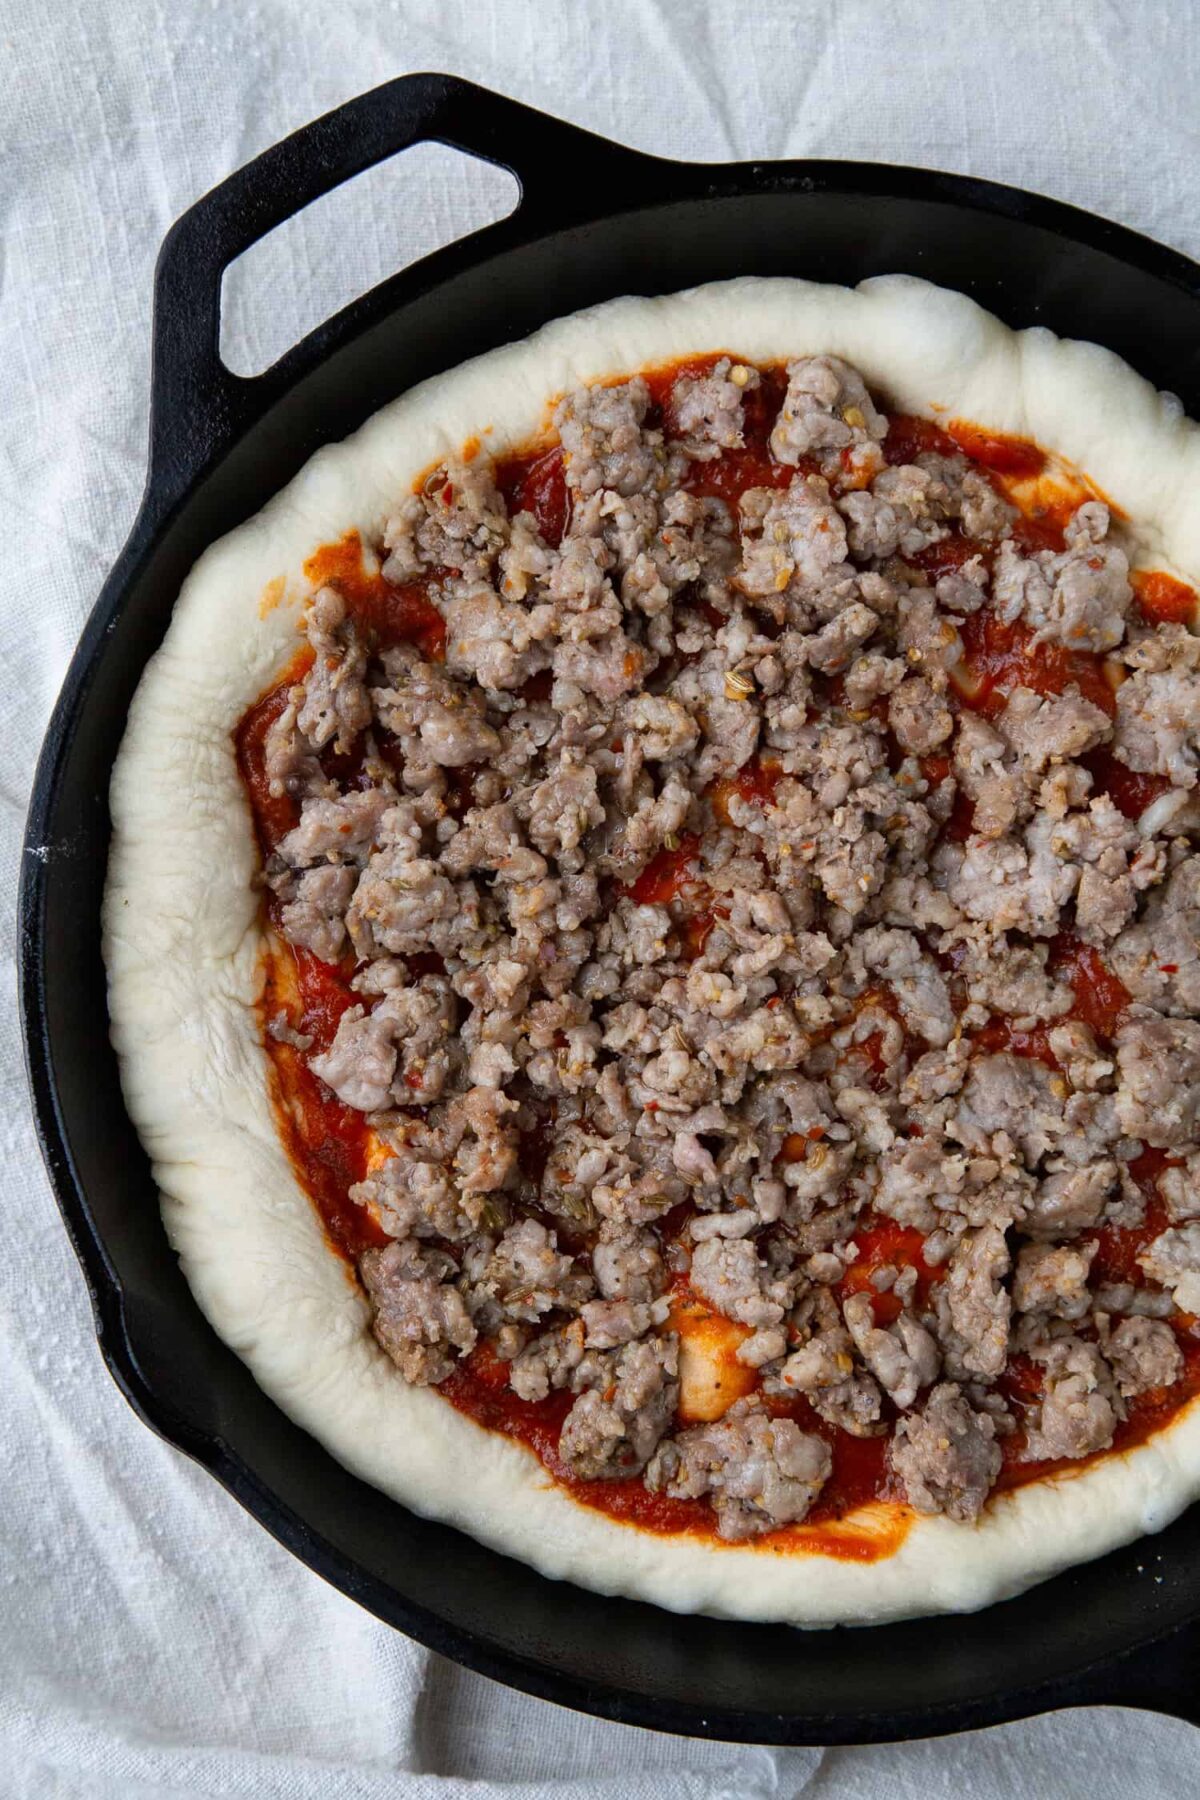 uncooked pizza with sausage in a cast iron skillet.